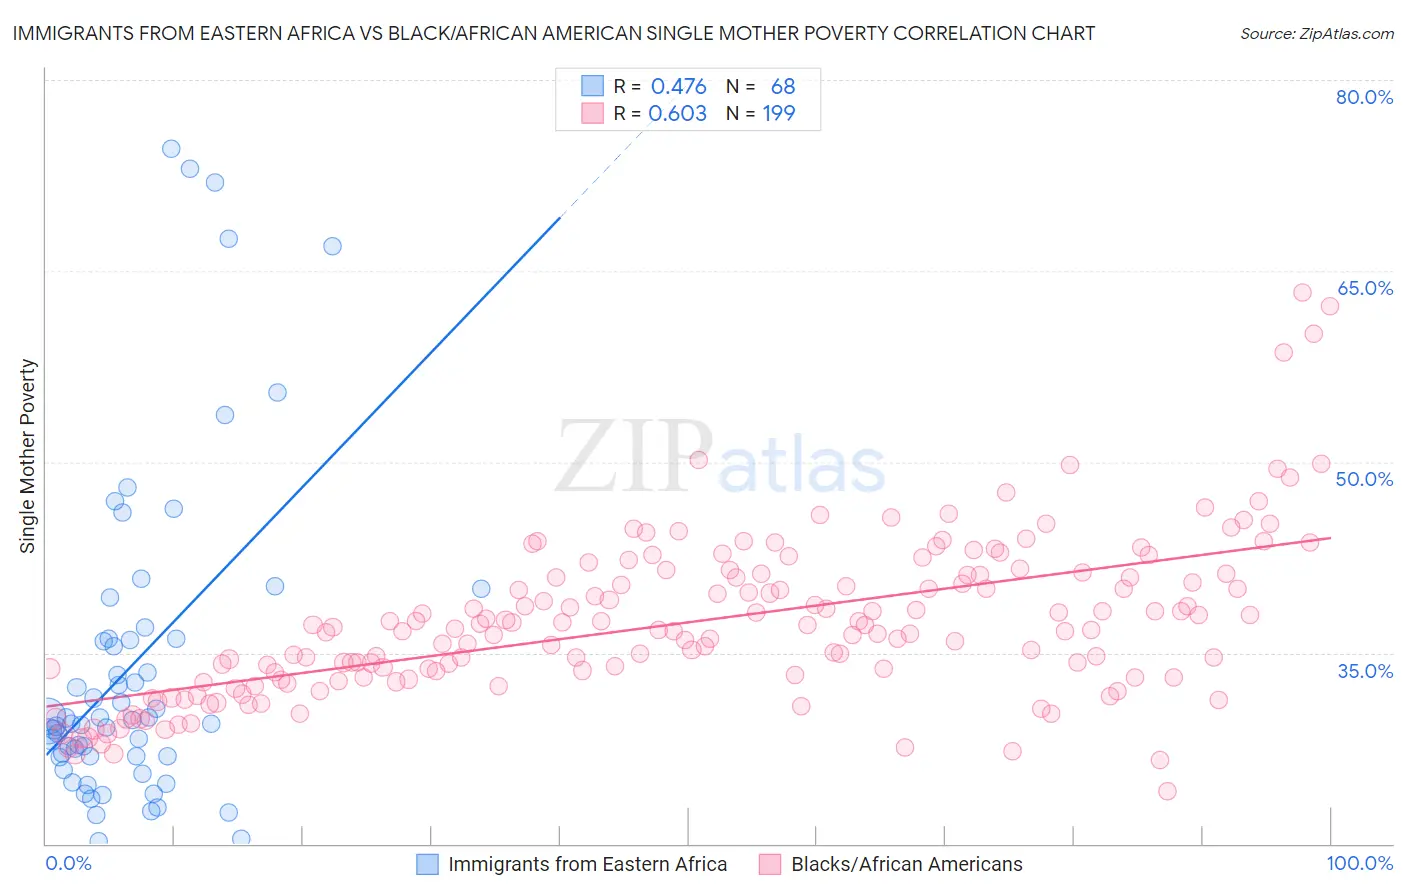 Immigrants from Eastern Africa vs Black/African American Single Mother Poverty